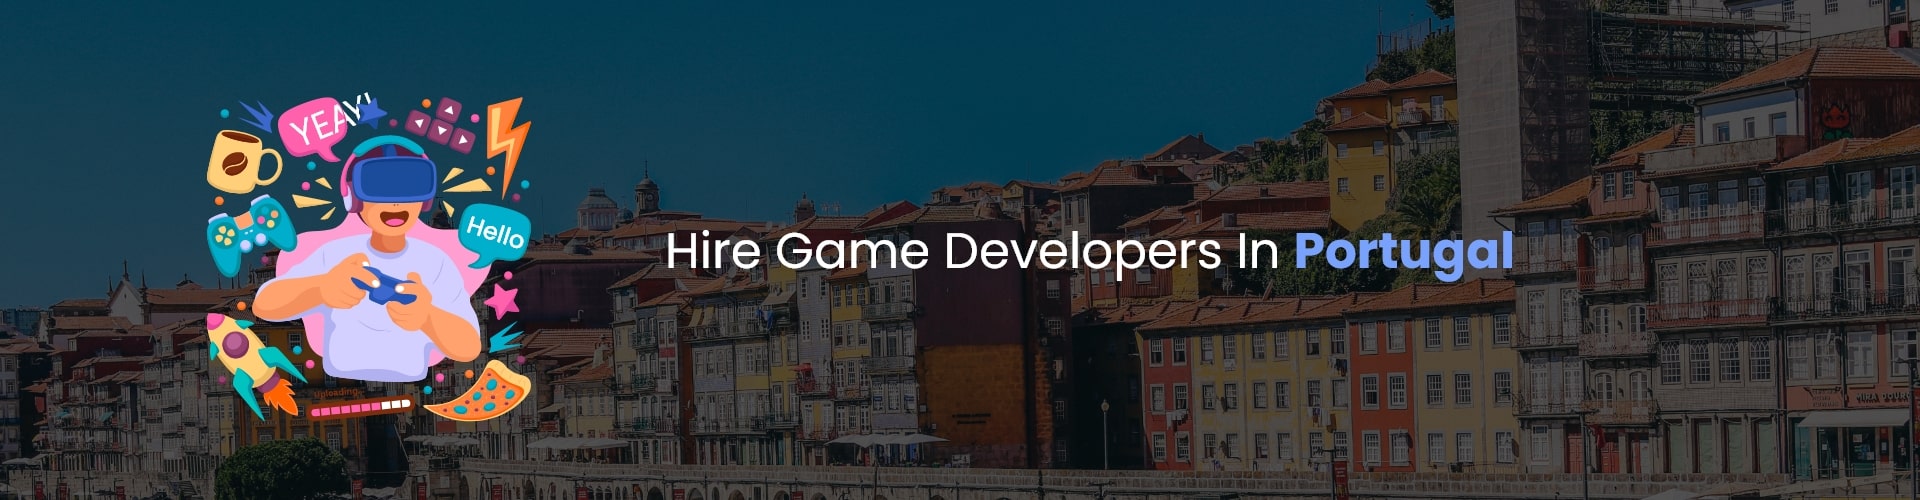 hire game developers in portugal